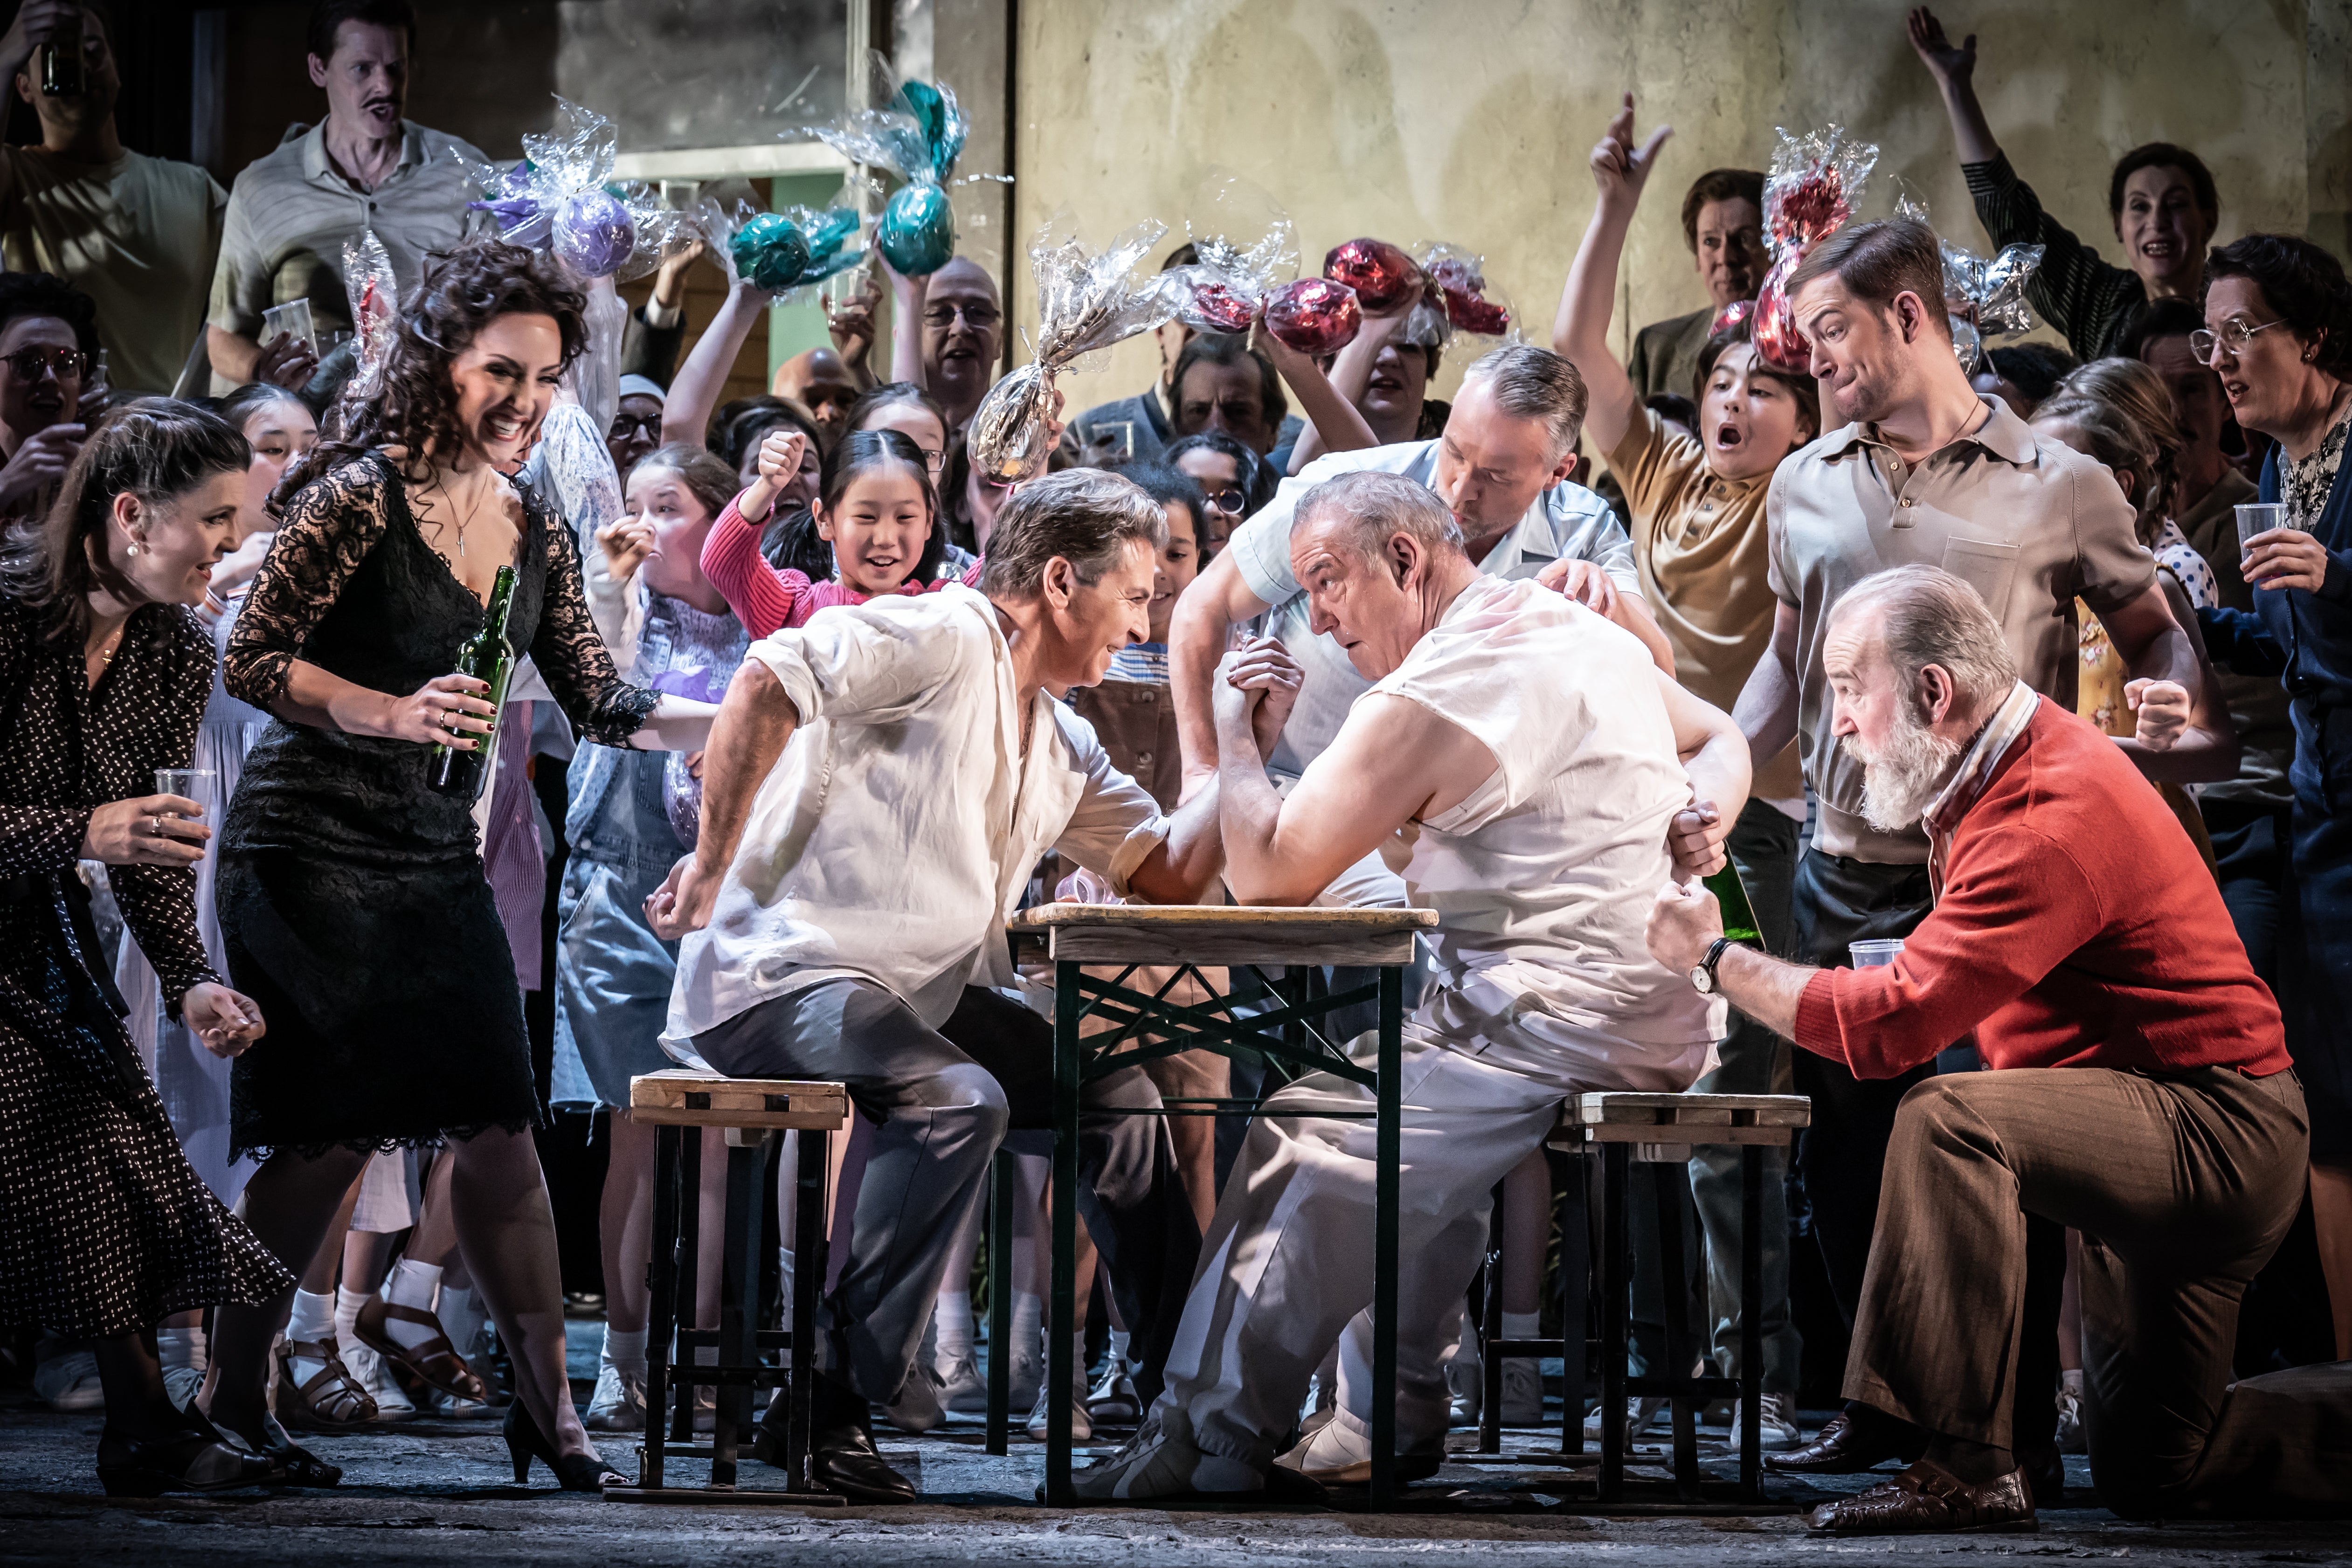 ‘Cavalleria rusticana' is a total masterpiece of staging